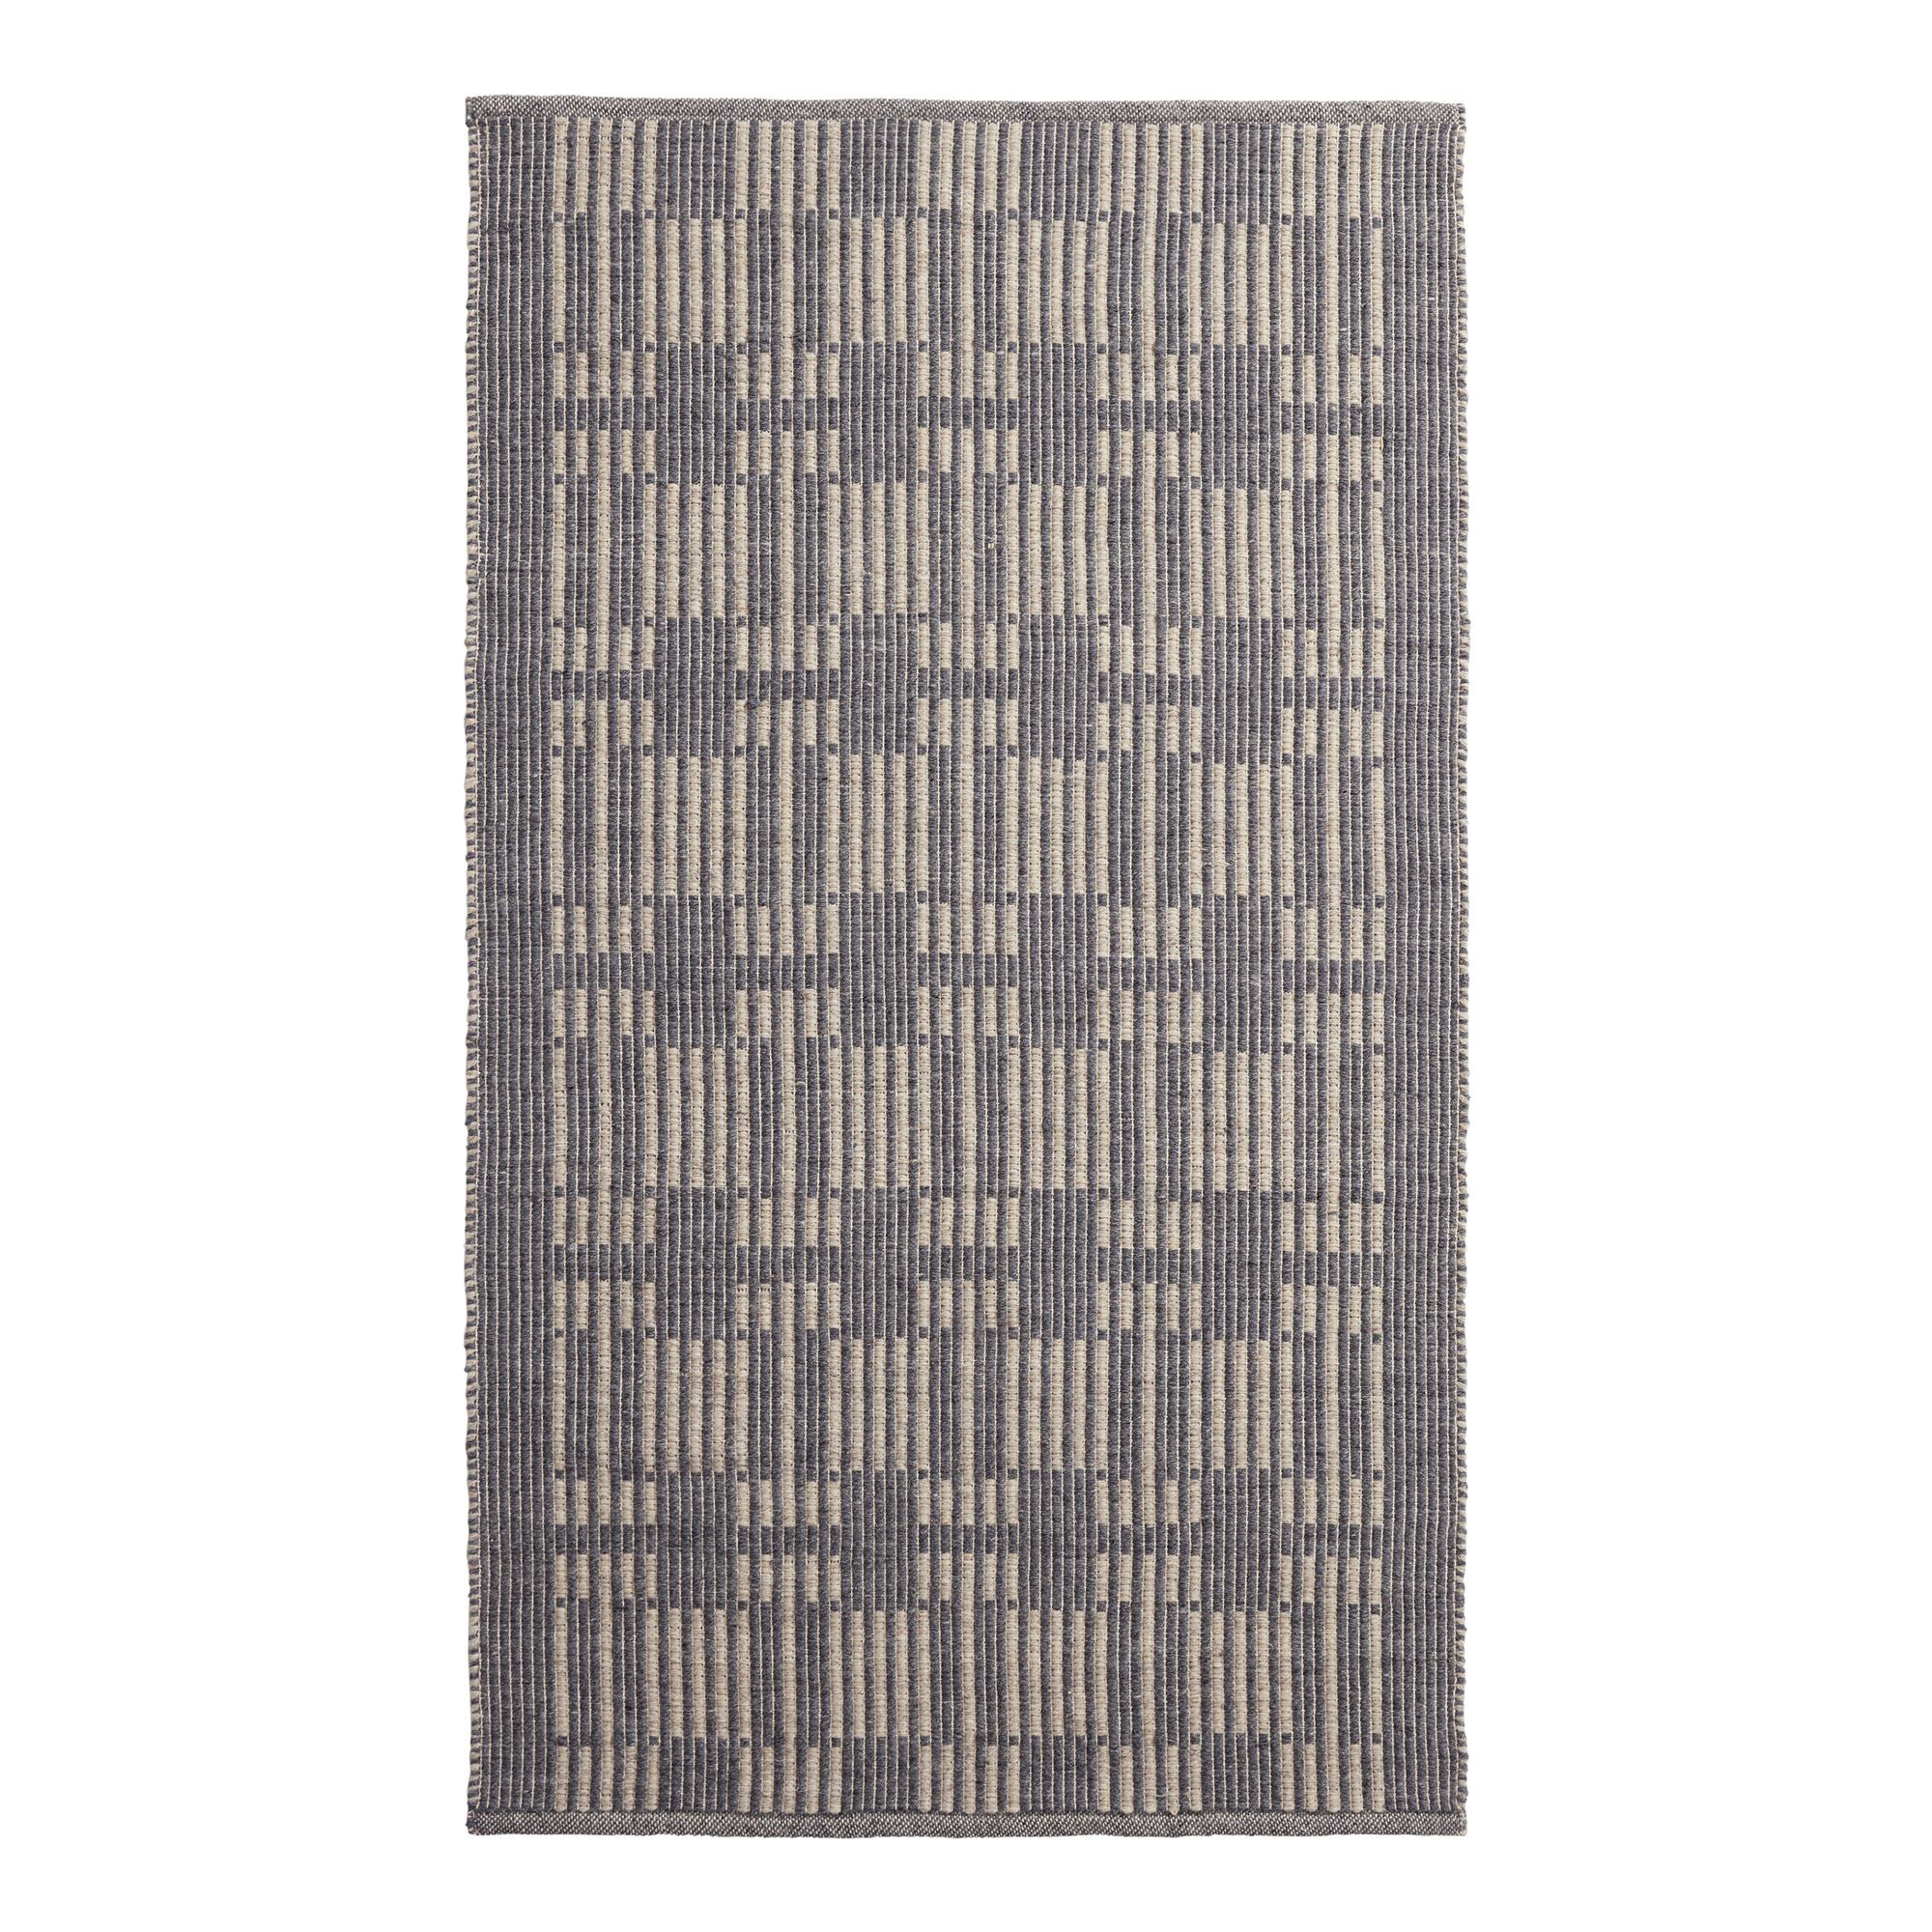 Hawthorne Gray and Taupe Wool Blend Reversible Area Rug | World Market